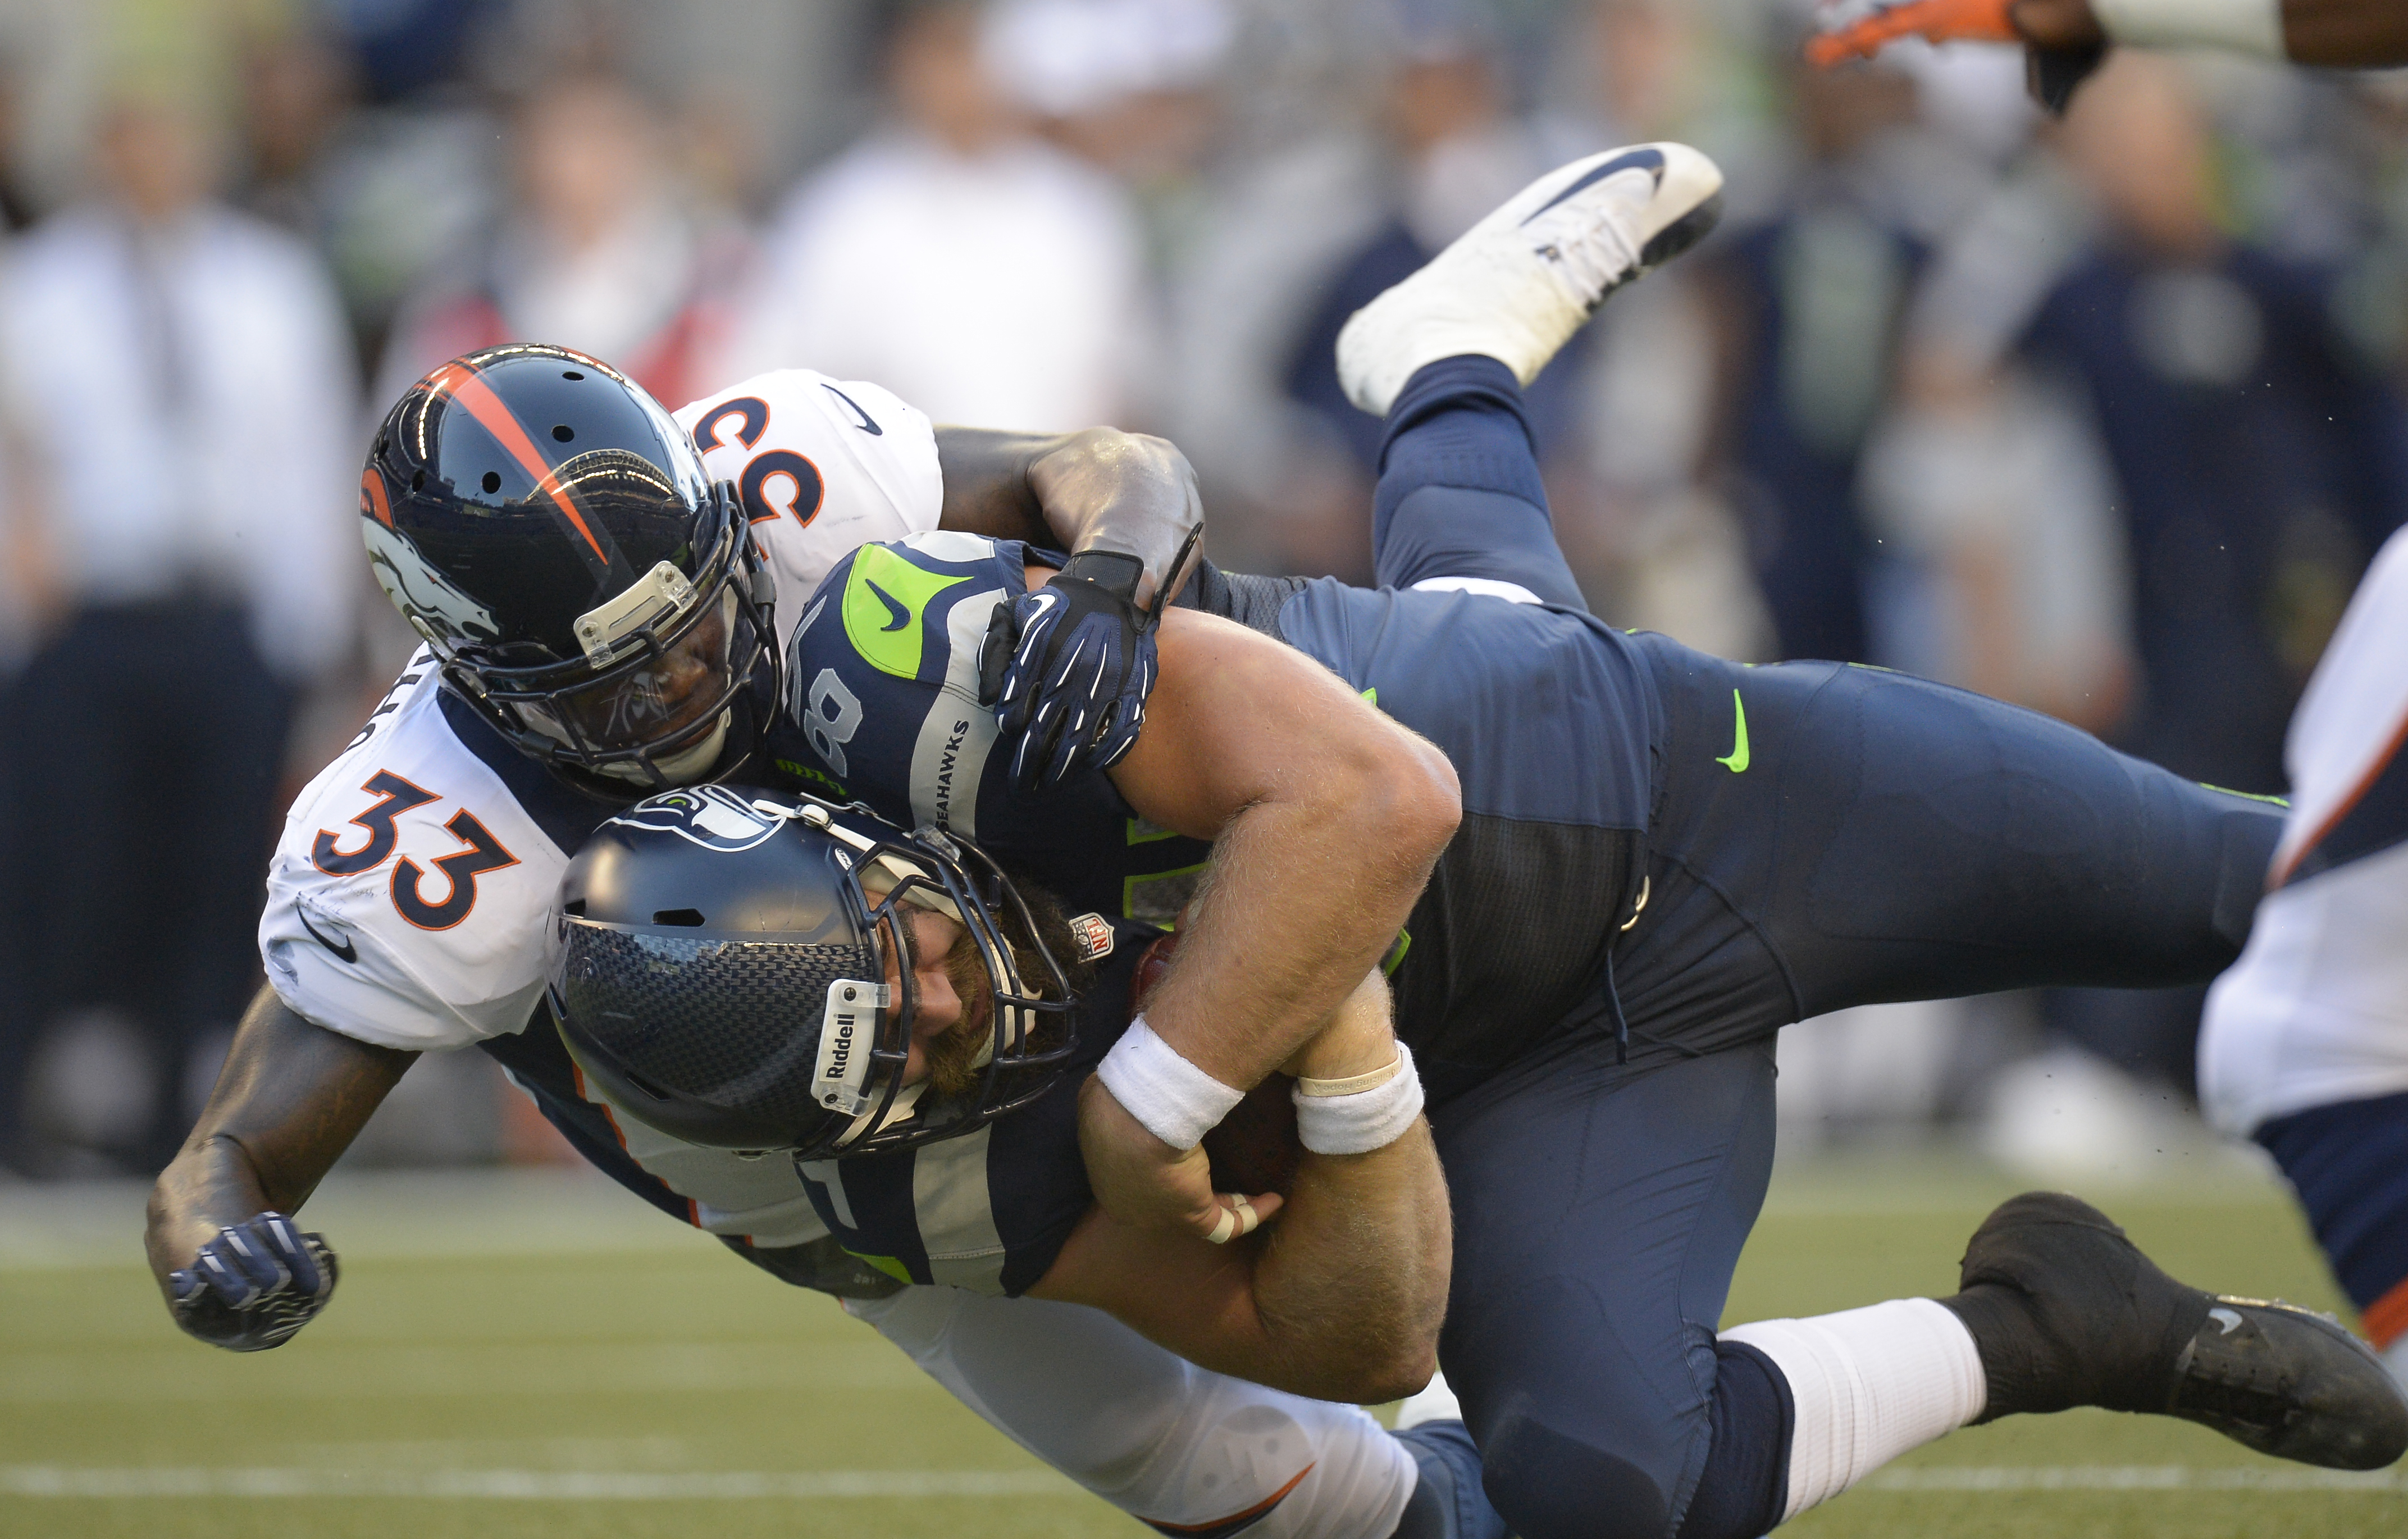 Seattle Seahawks tight end Sean McGrath (84) gets wrapped up by Denver Broncos safety Duke Ihenacho (33) after a gain during the first quarter, on Aug. 17, 2013 at Century Link Field in Seattle. (John Leyba / Denver Post / Getty Images)